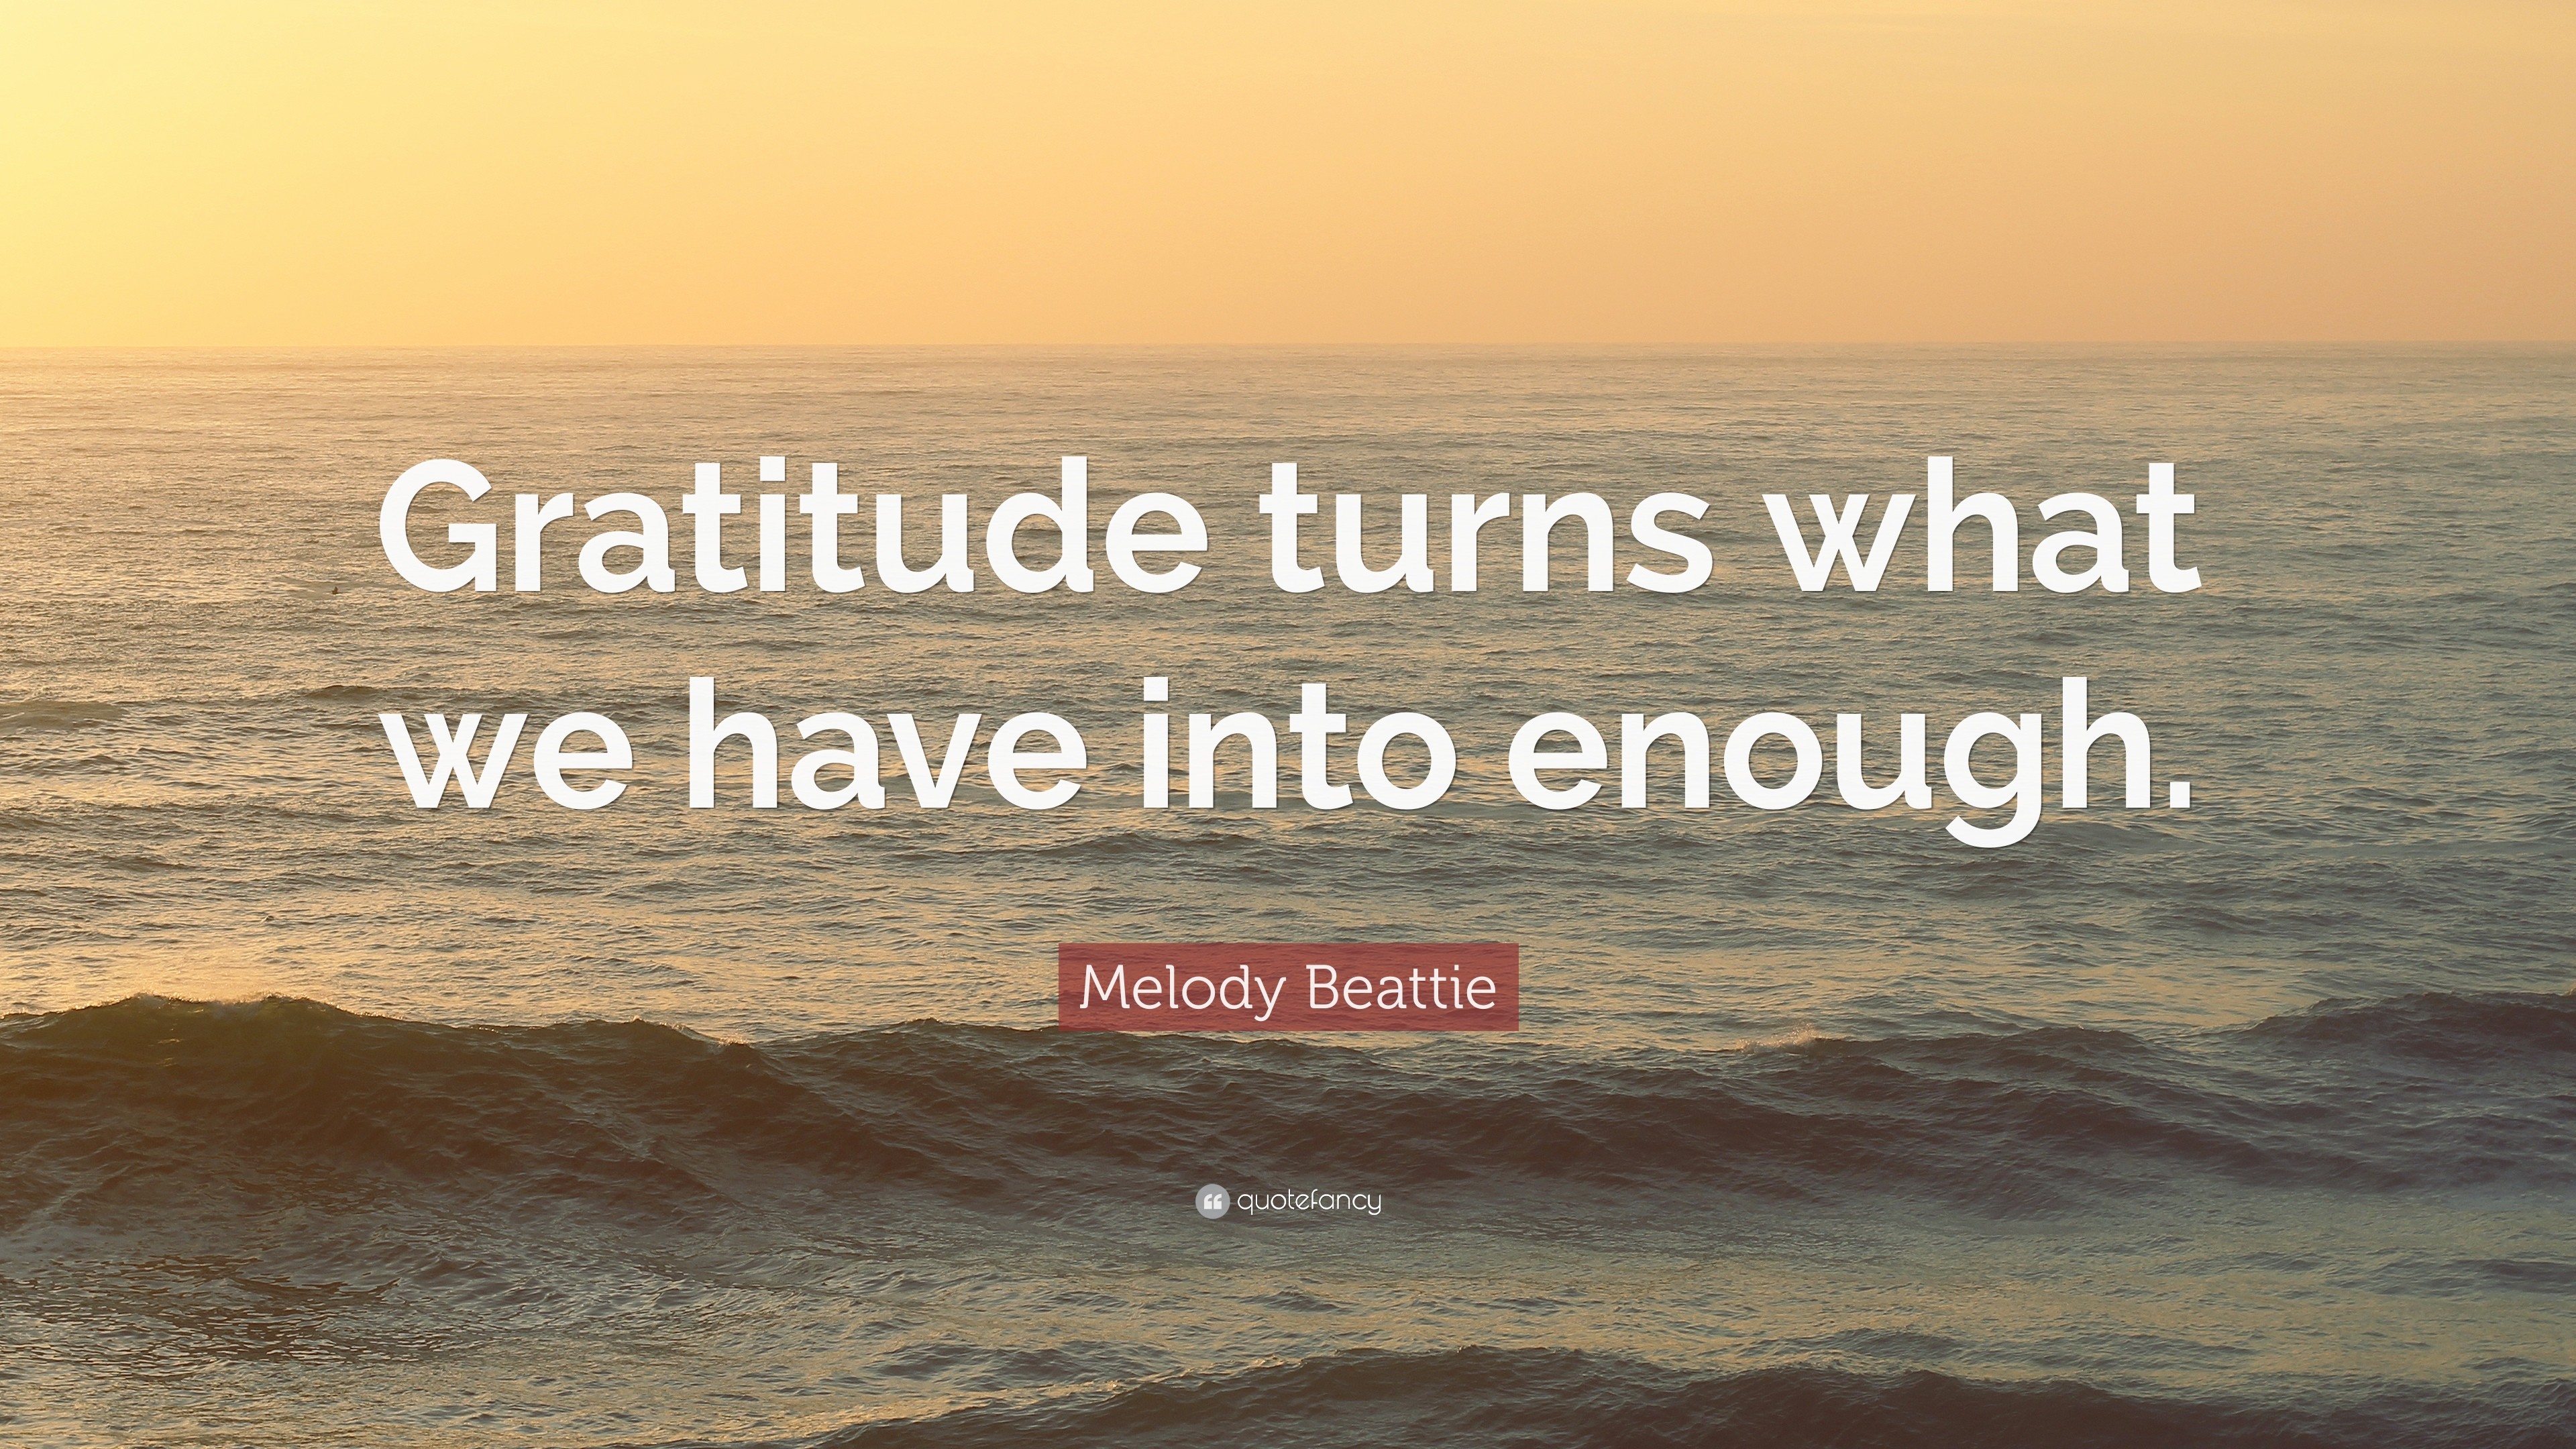 3840x2160 Melody Beattie Quote: “Gratitude turns what we have into enough.”